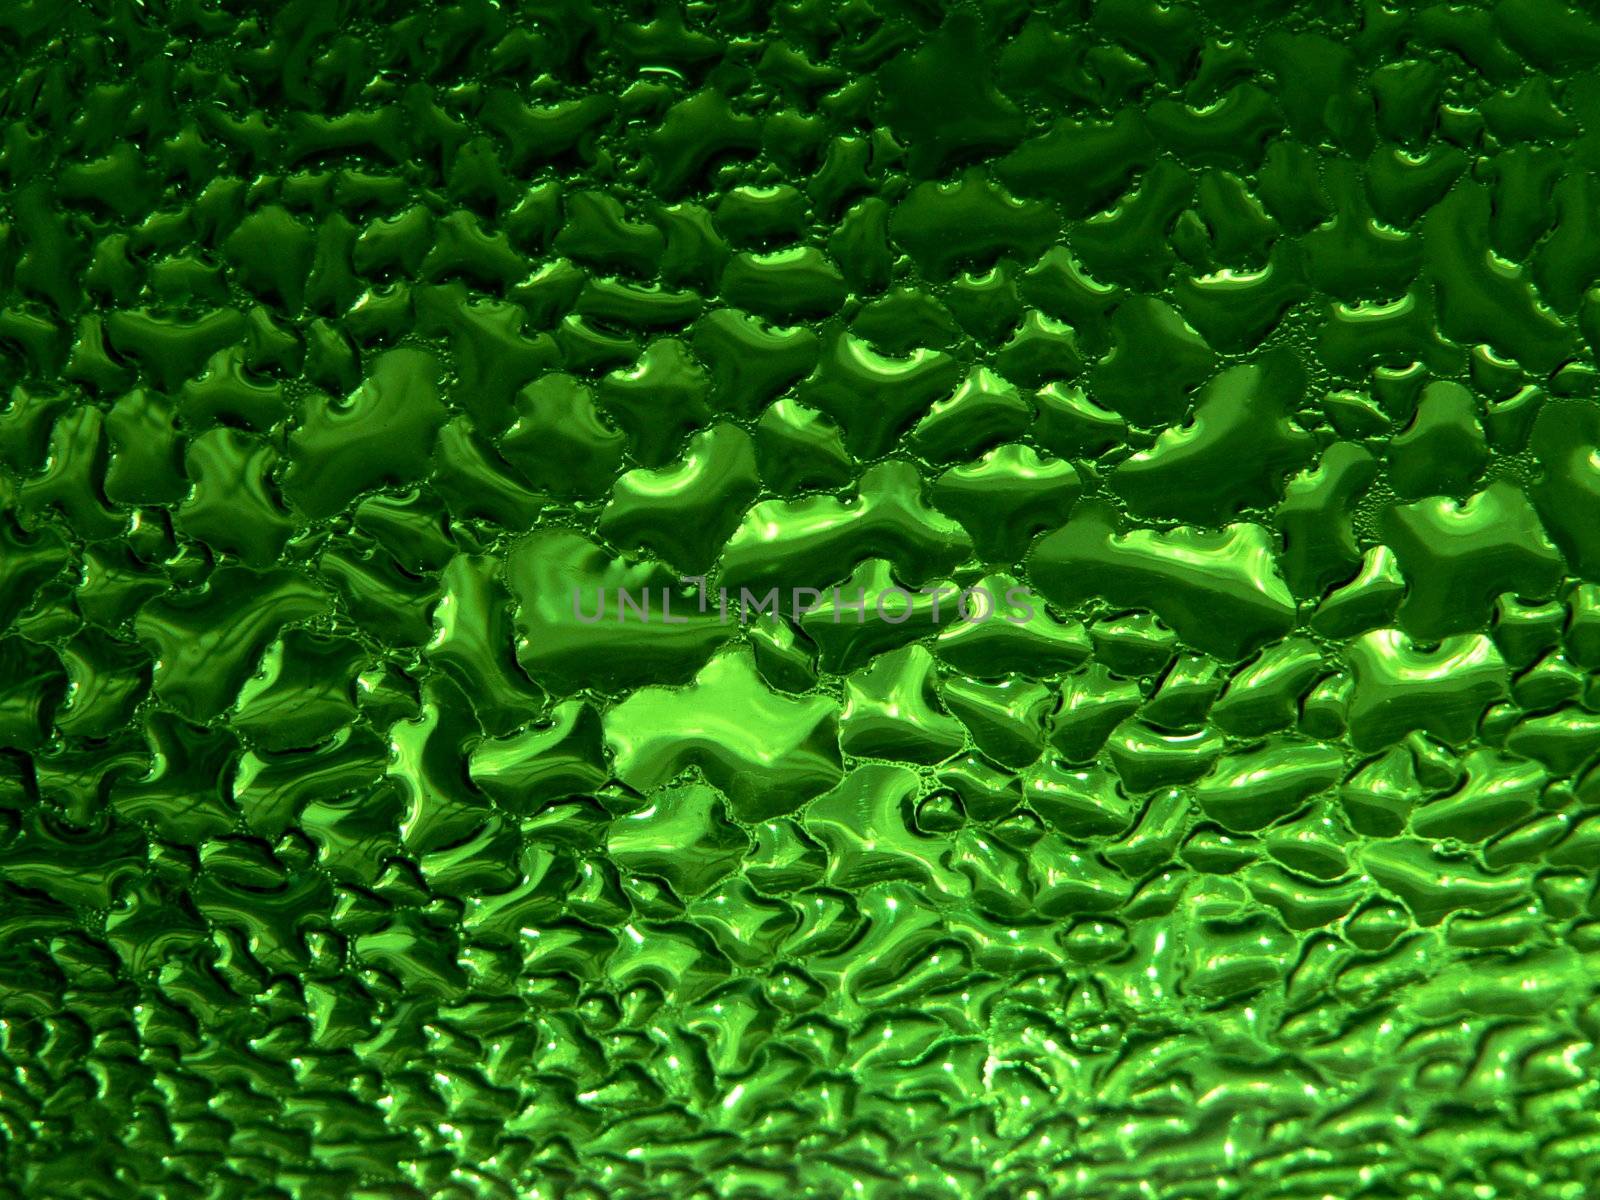 Series of the dripped glass. Green color 2